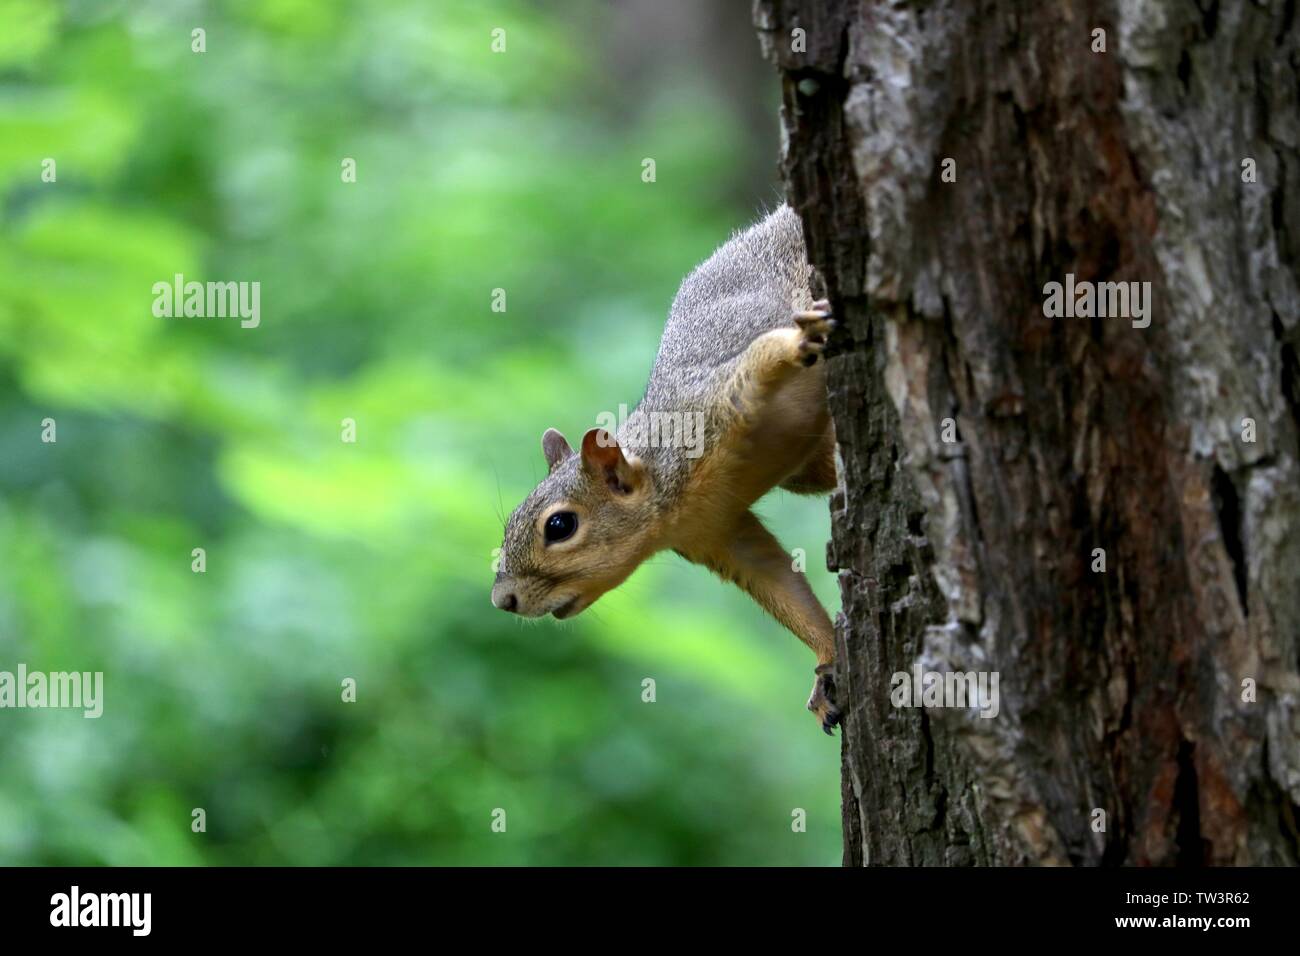 Closeup of a squirrel on a tree aware of its surroundings Stock Photo